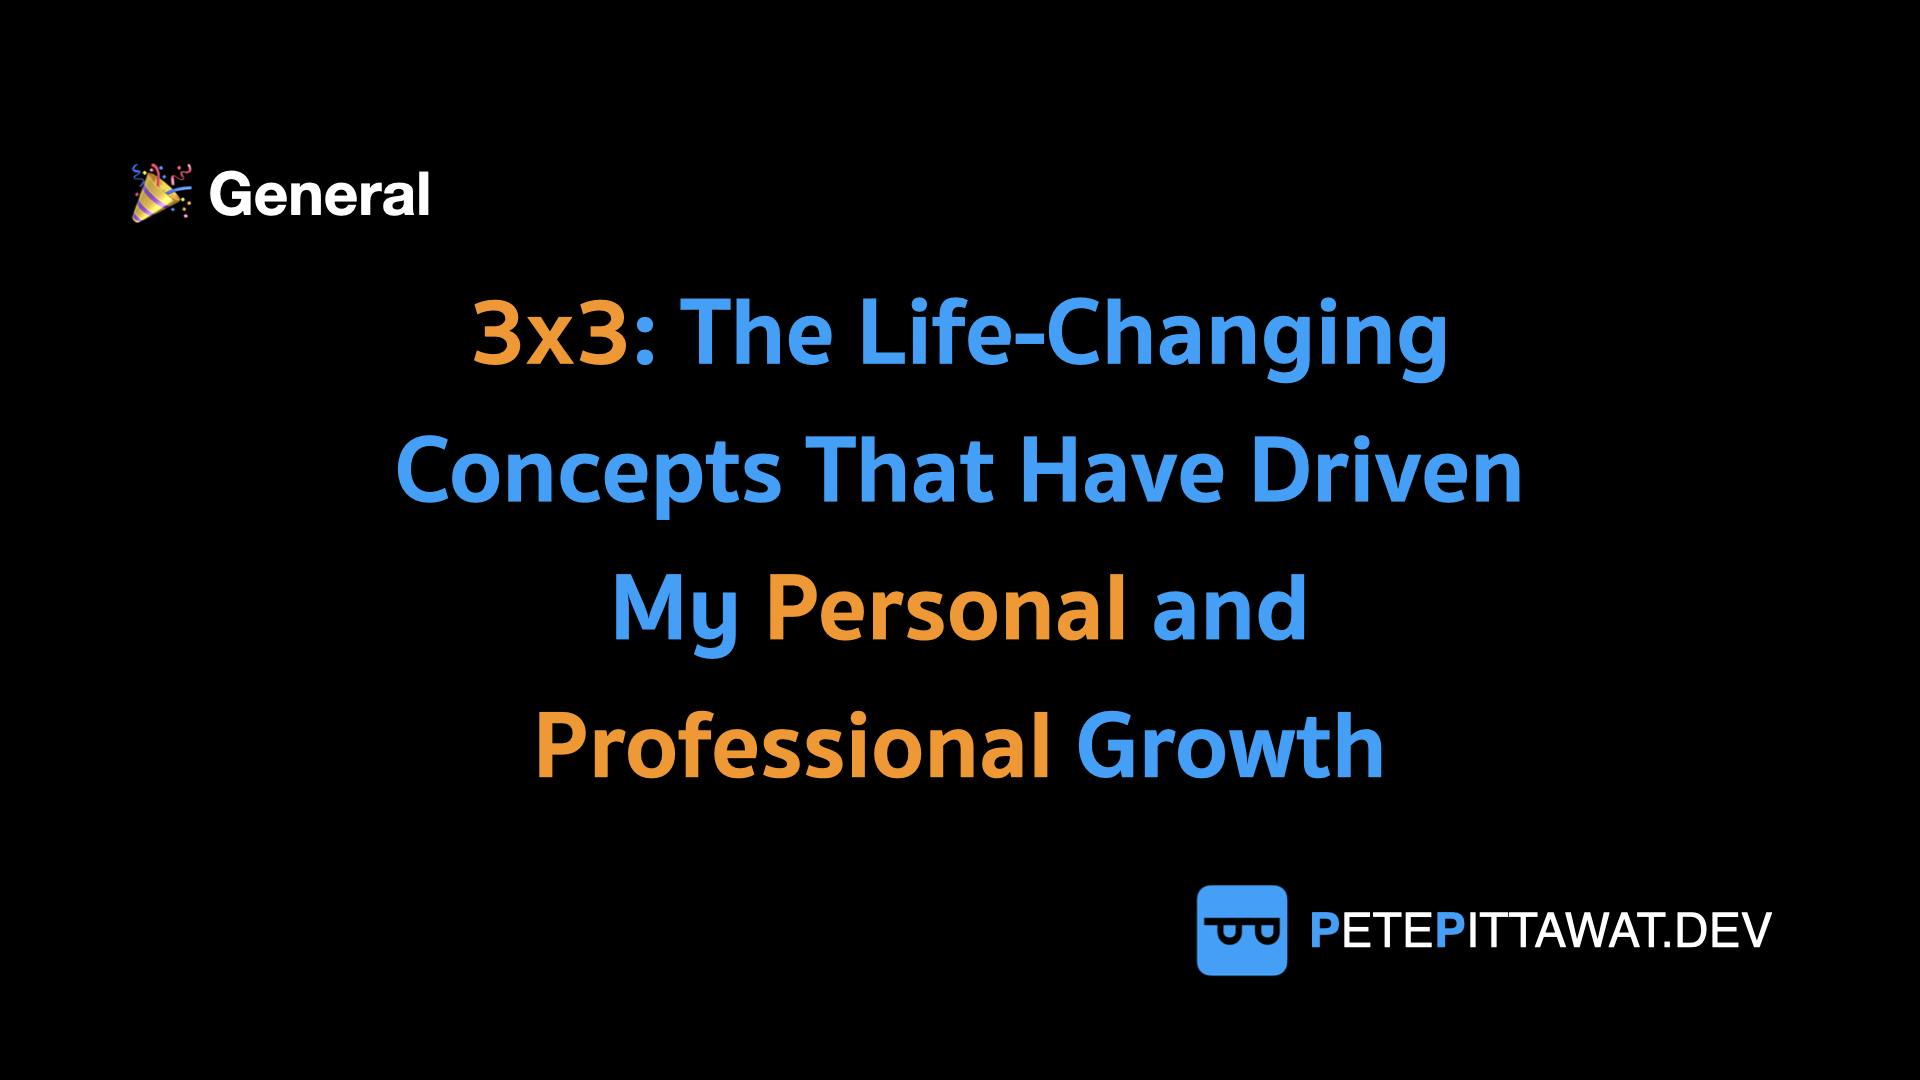 Cover Image for 3x3: The Life-Changing Concepts That Have Driven My Personal and Professional Growth